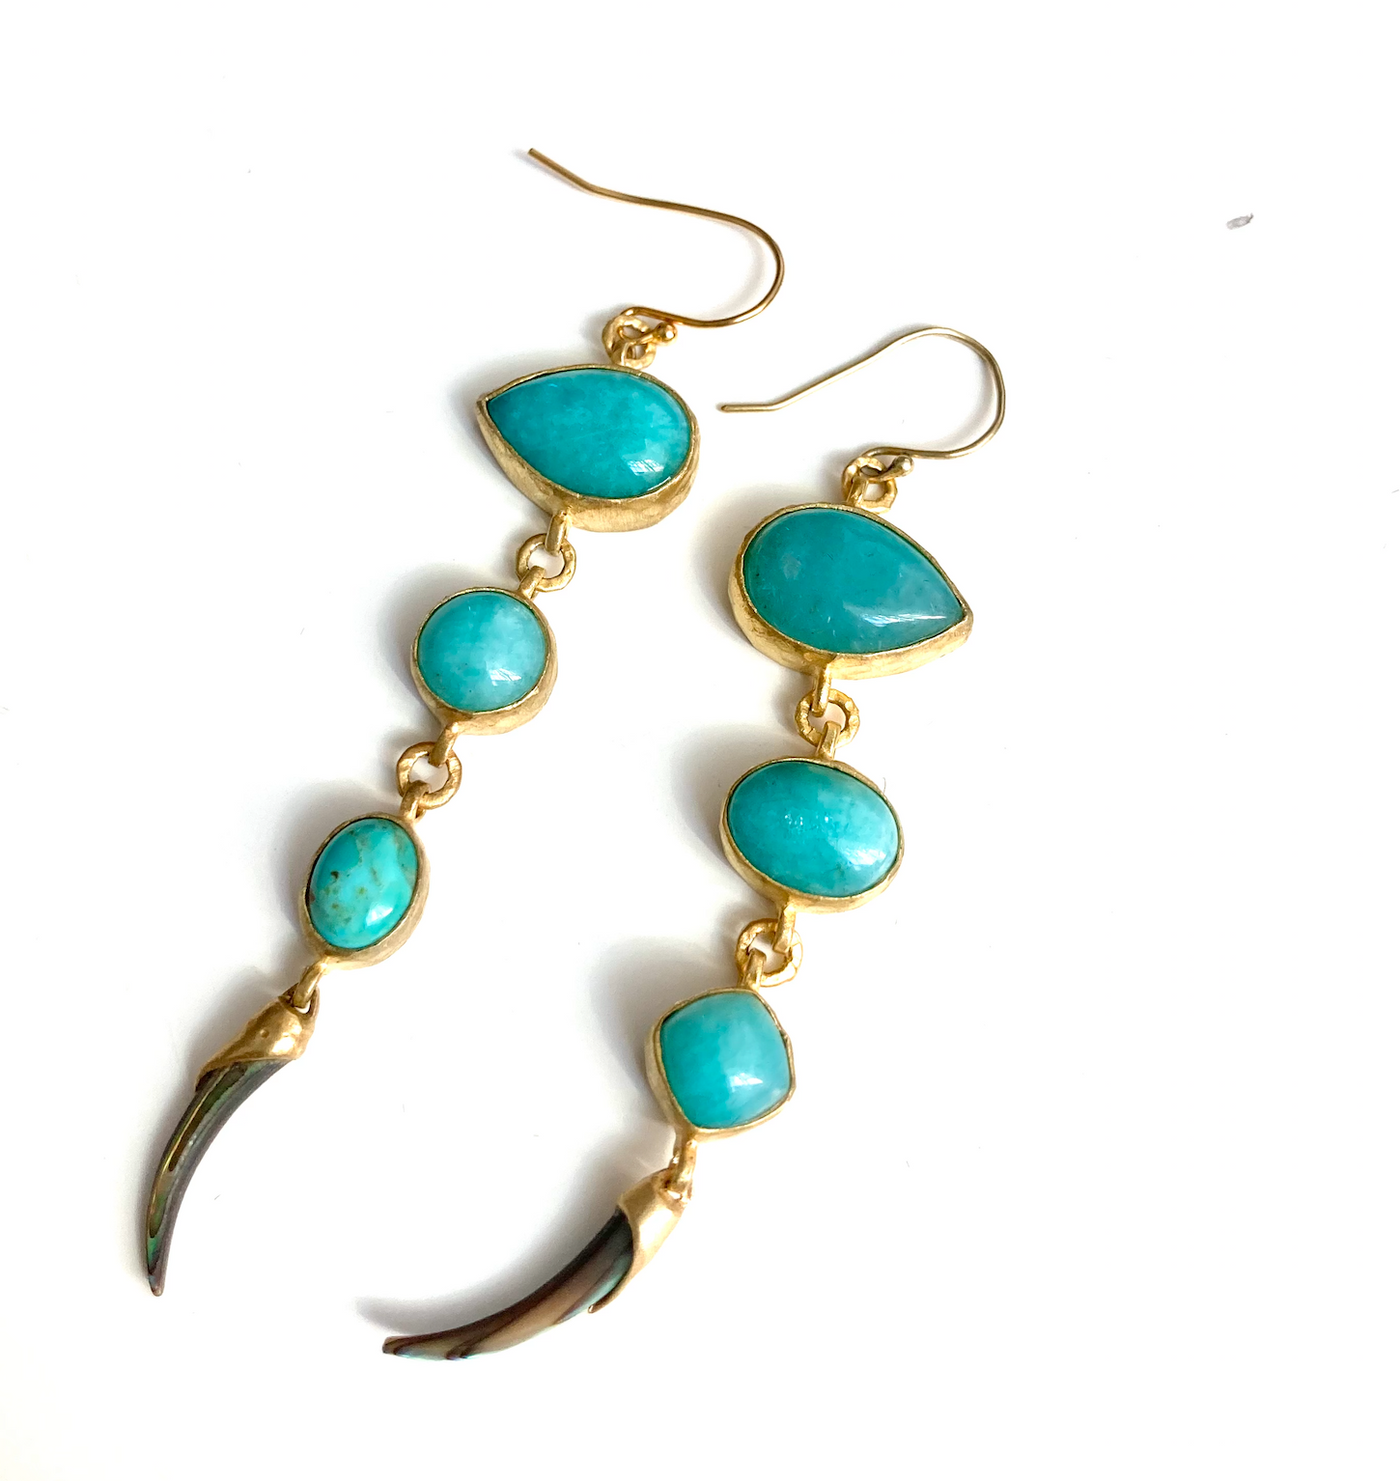 Mix Matched Turquoise and Peruvian opal Earrings